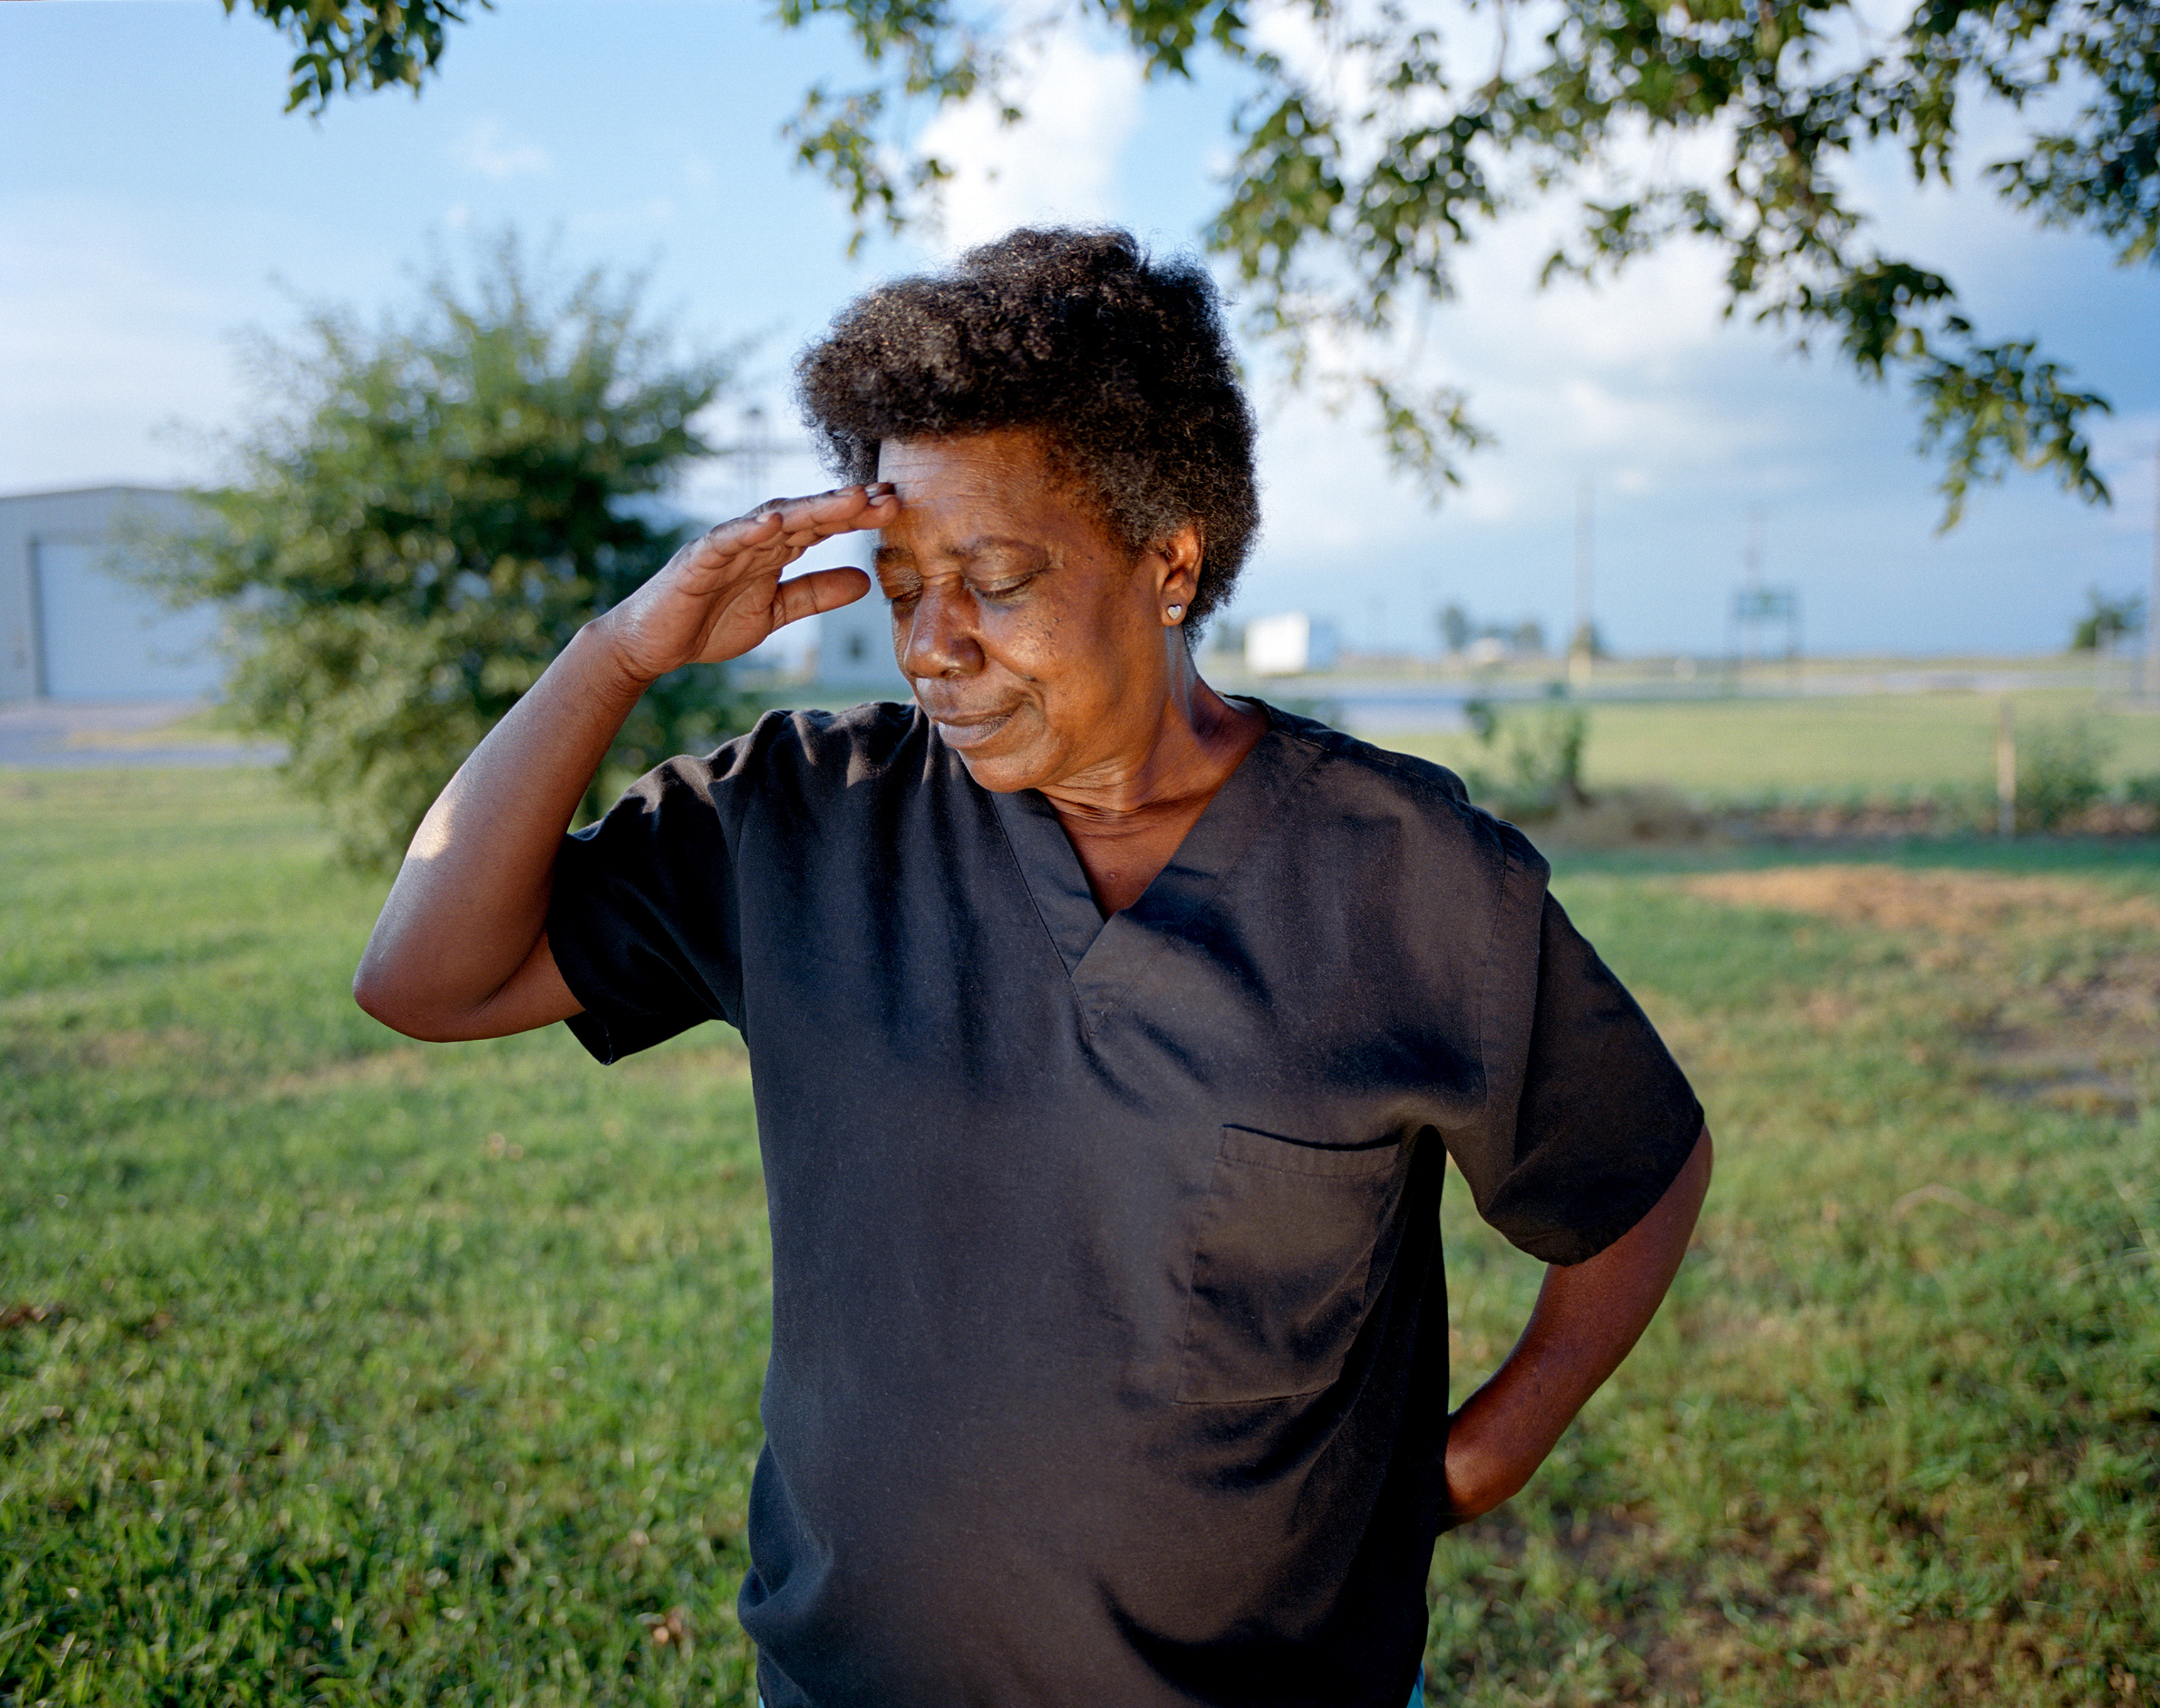 Ora Scaife reflects on the atrocities committed during the 1919 Race Massacre in Philips County, Ark., in which over 200 African Americans were murdered within a three-day span. Scaife and her family have lived in Phillips County for generations. But specific stories surrounding the massacre were not passed down. When she was a child, Scaife’s family would whisper at the kitchen table about the massacre and send her back to bed if she was caught listening. (Johnathon Kelso)